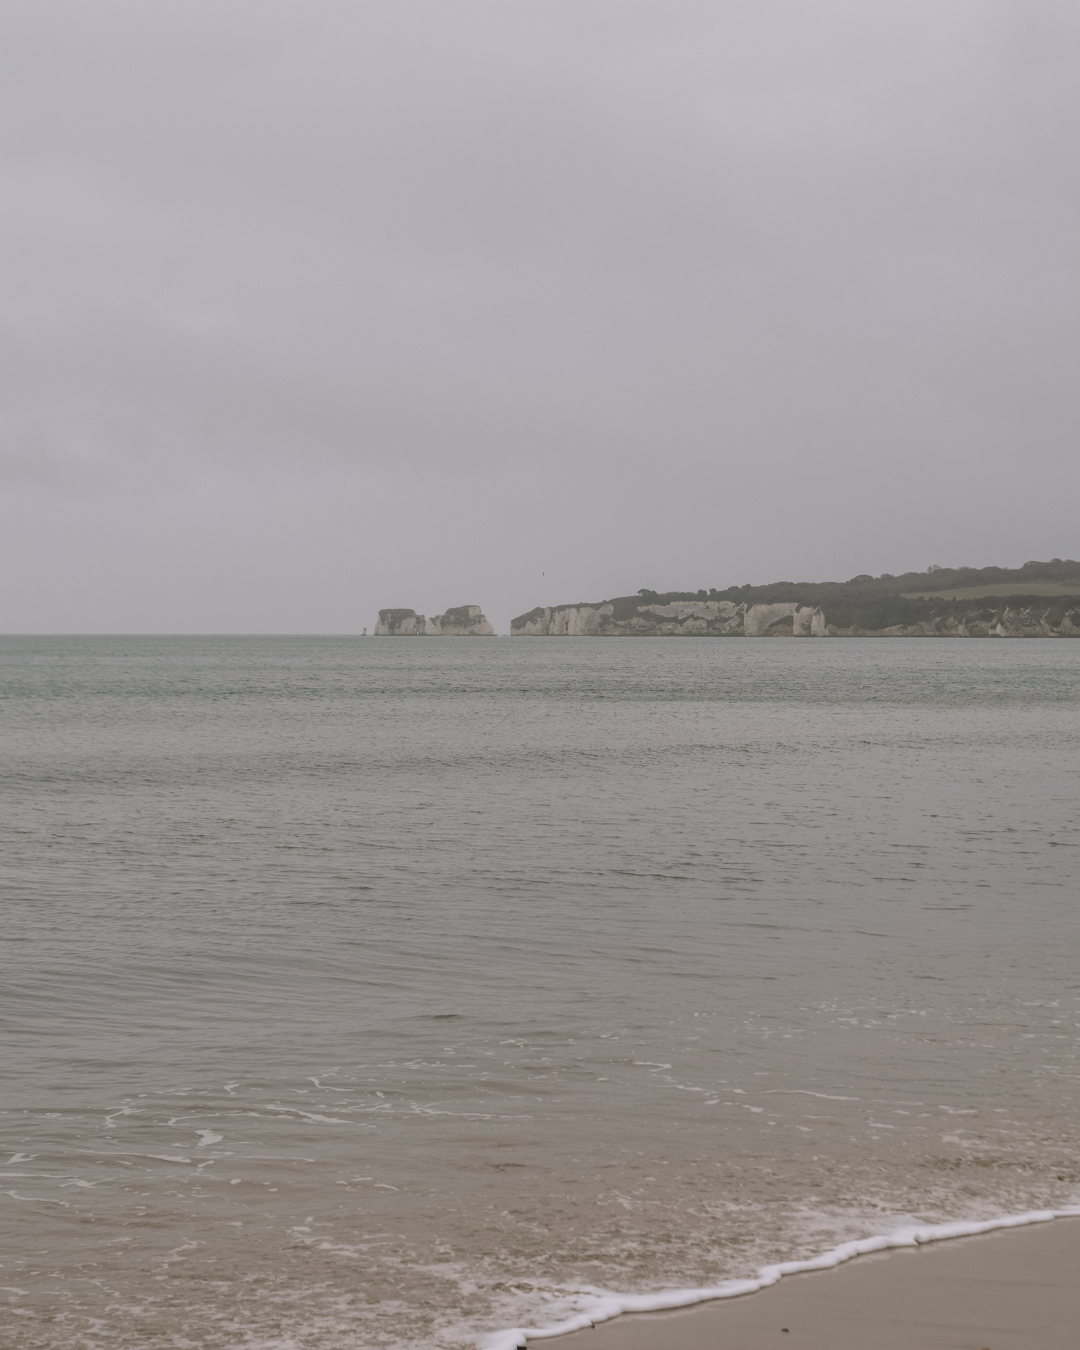 Places to visit in Dorset - Studland beach